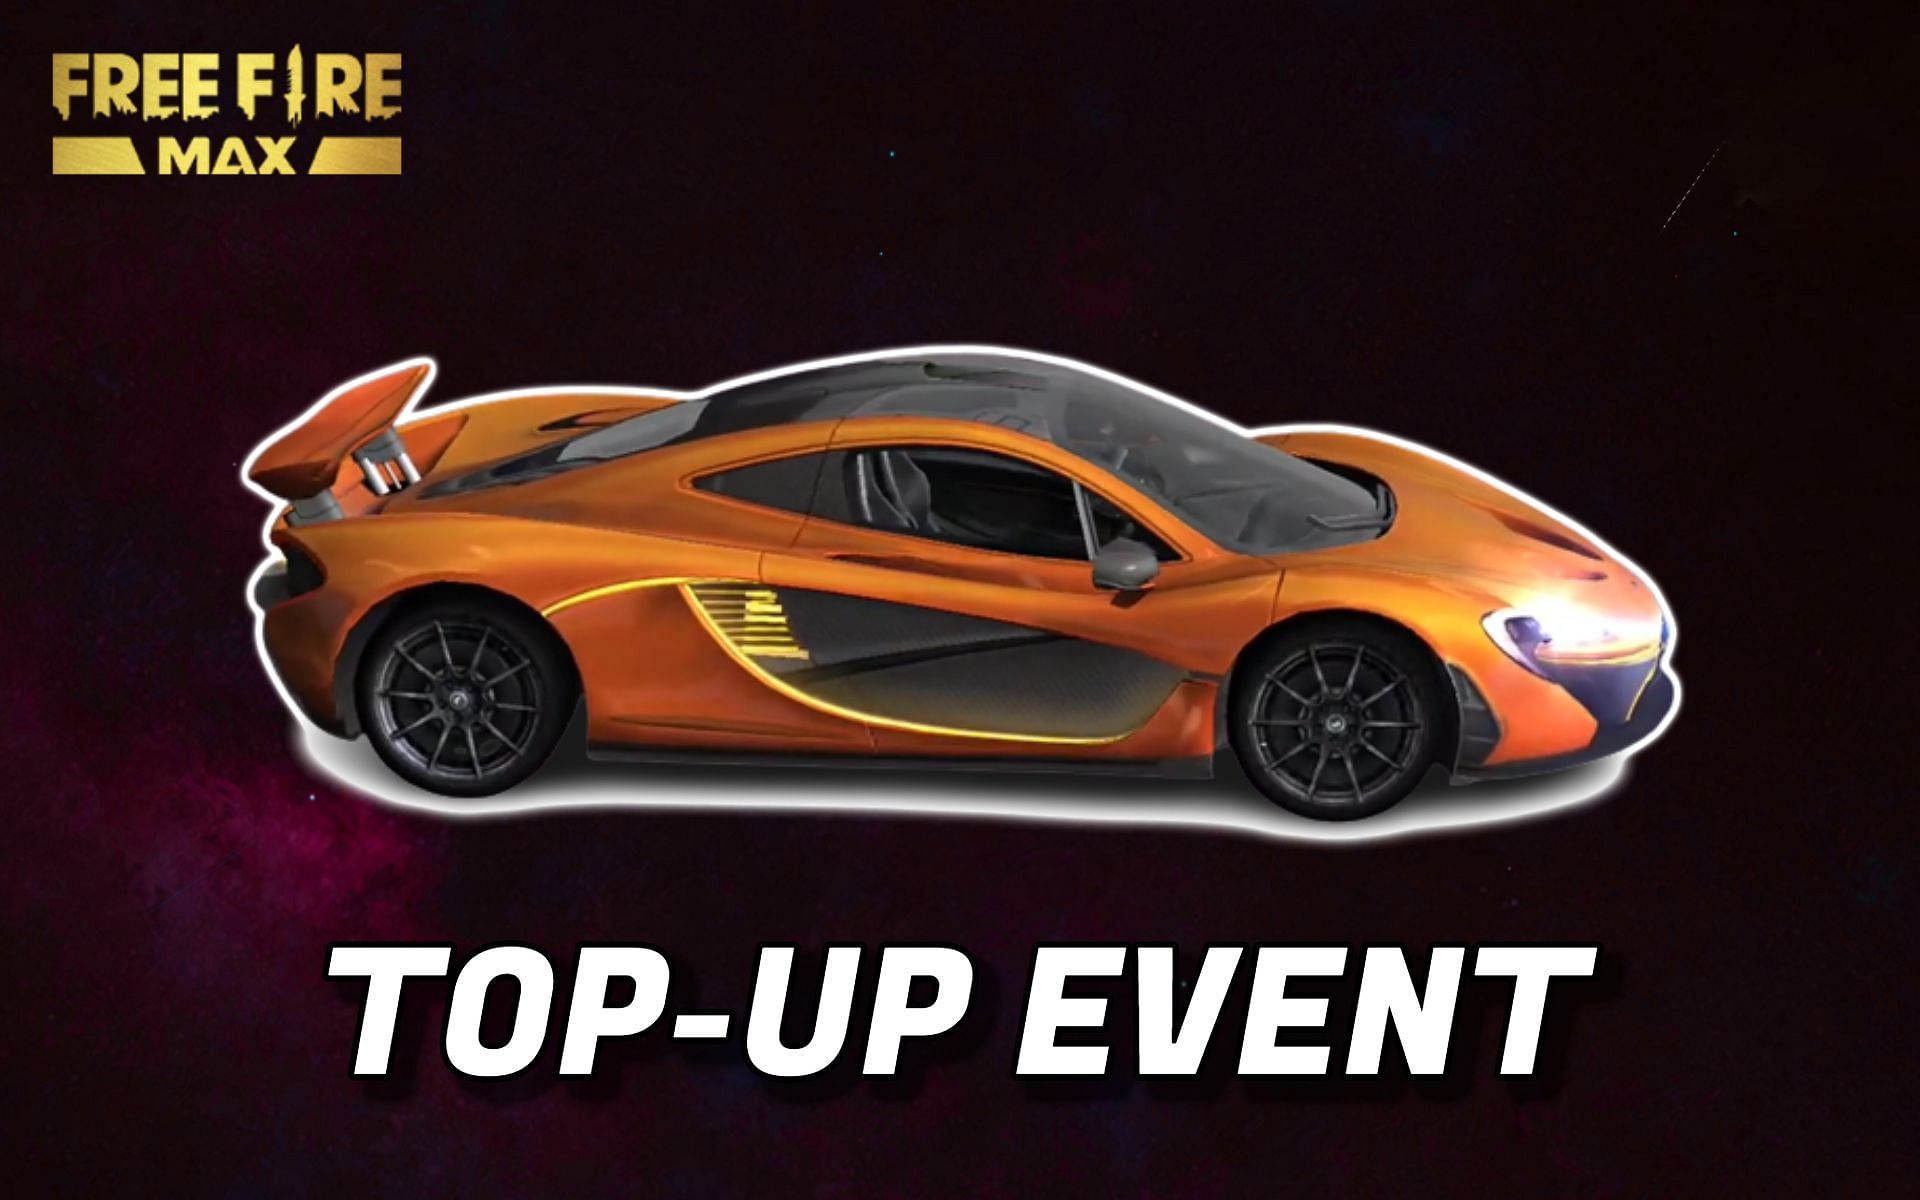 Numerous Free Fire MAX top-up events have taken place so far (Image via Garena)